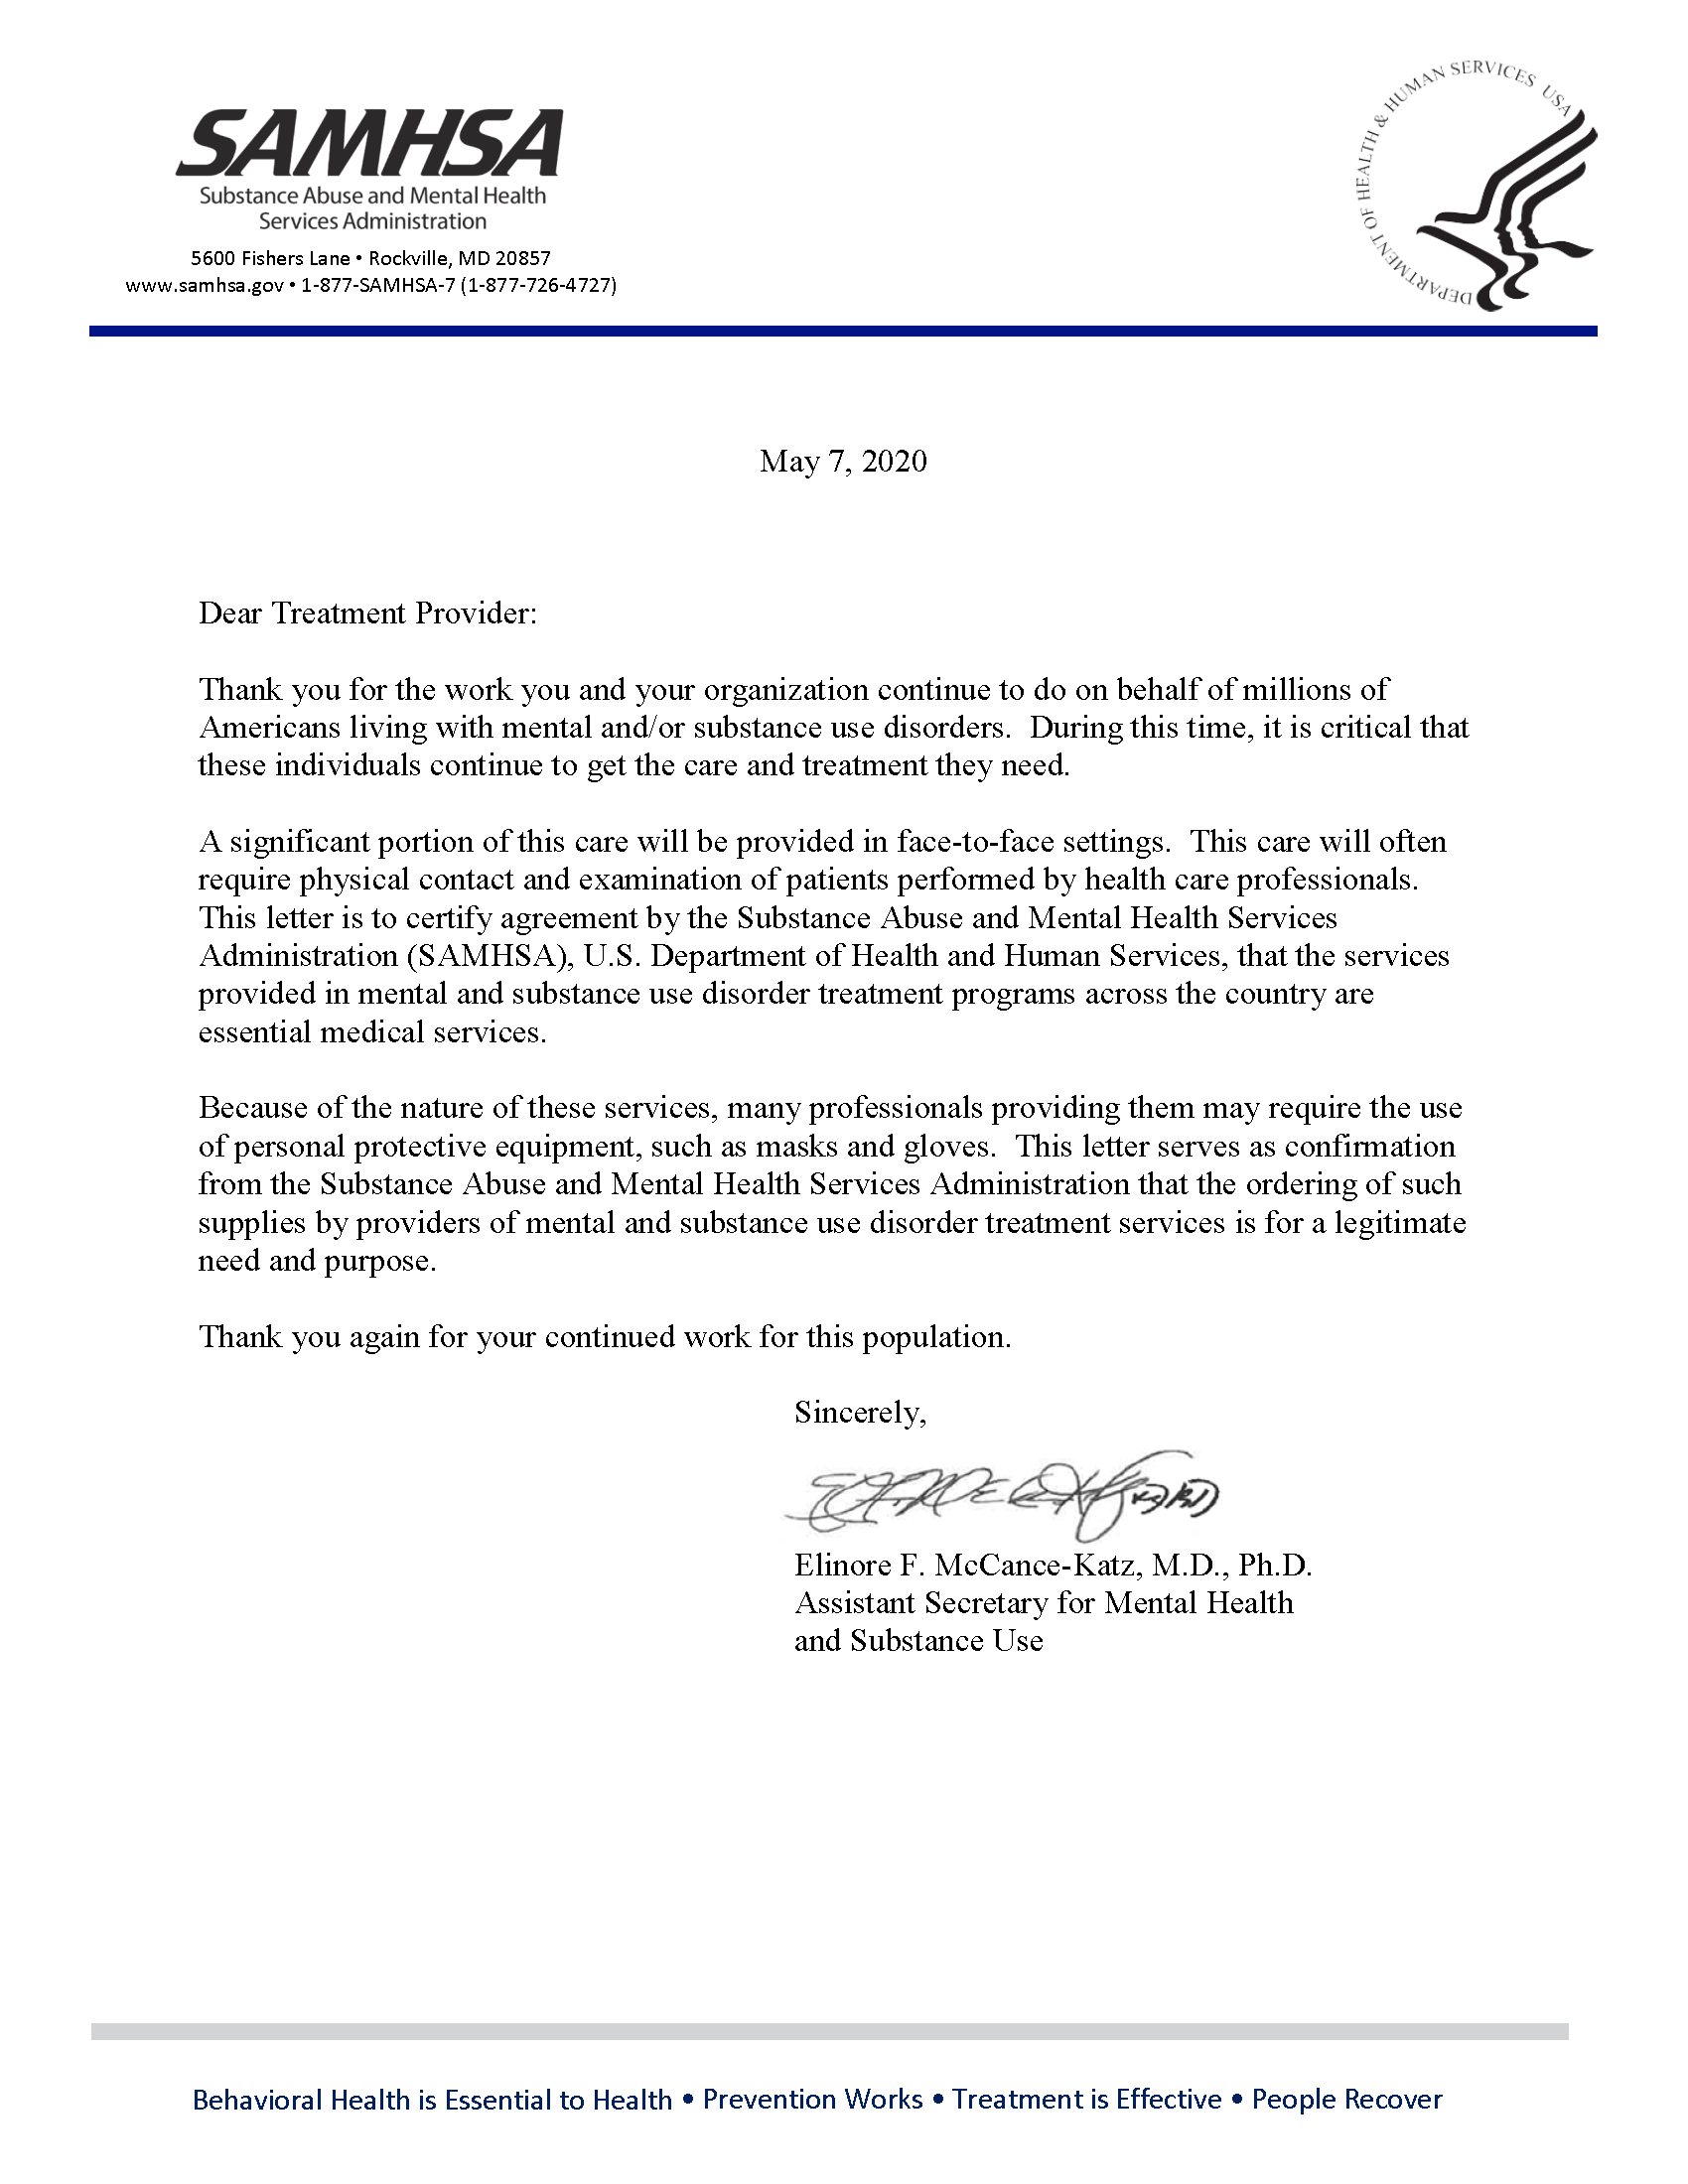 SAMHSA Letter to Treatment Providers